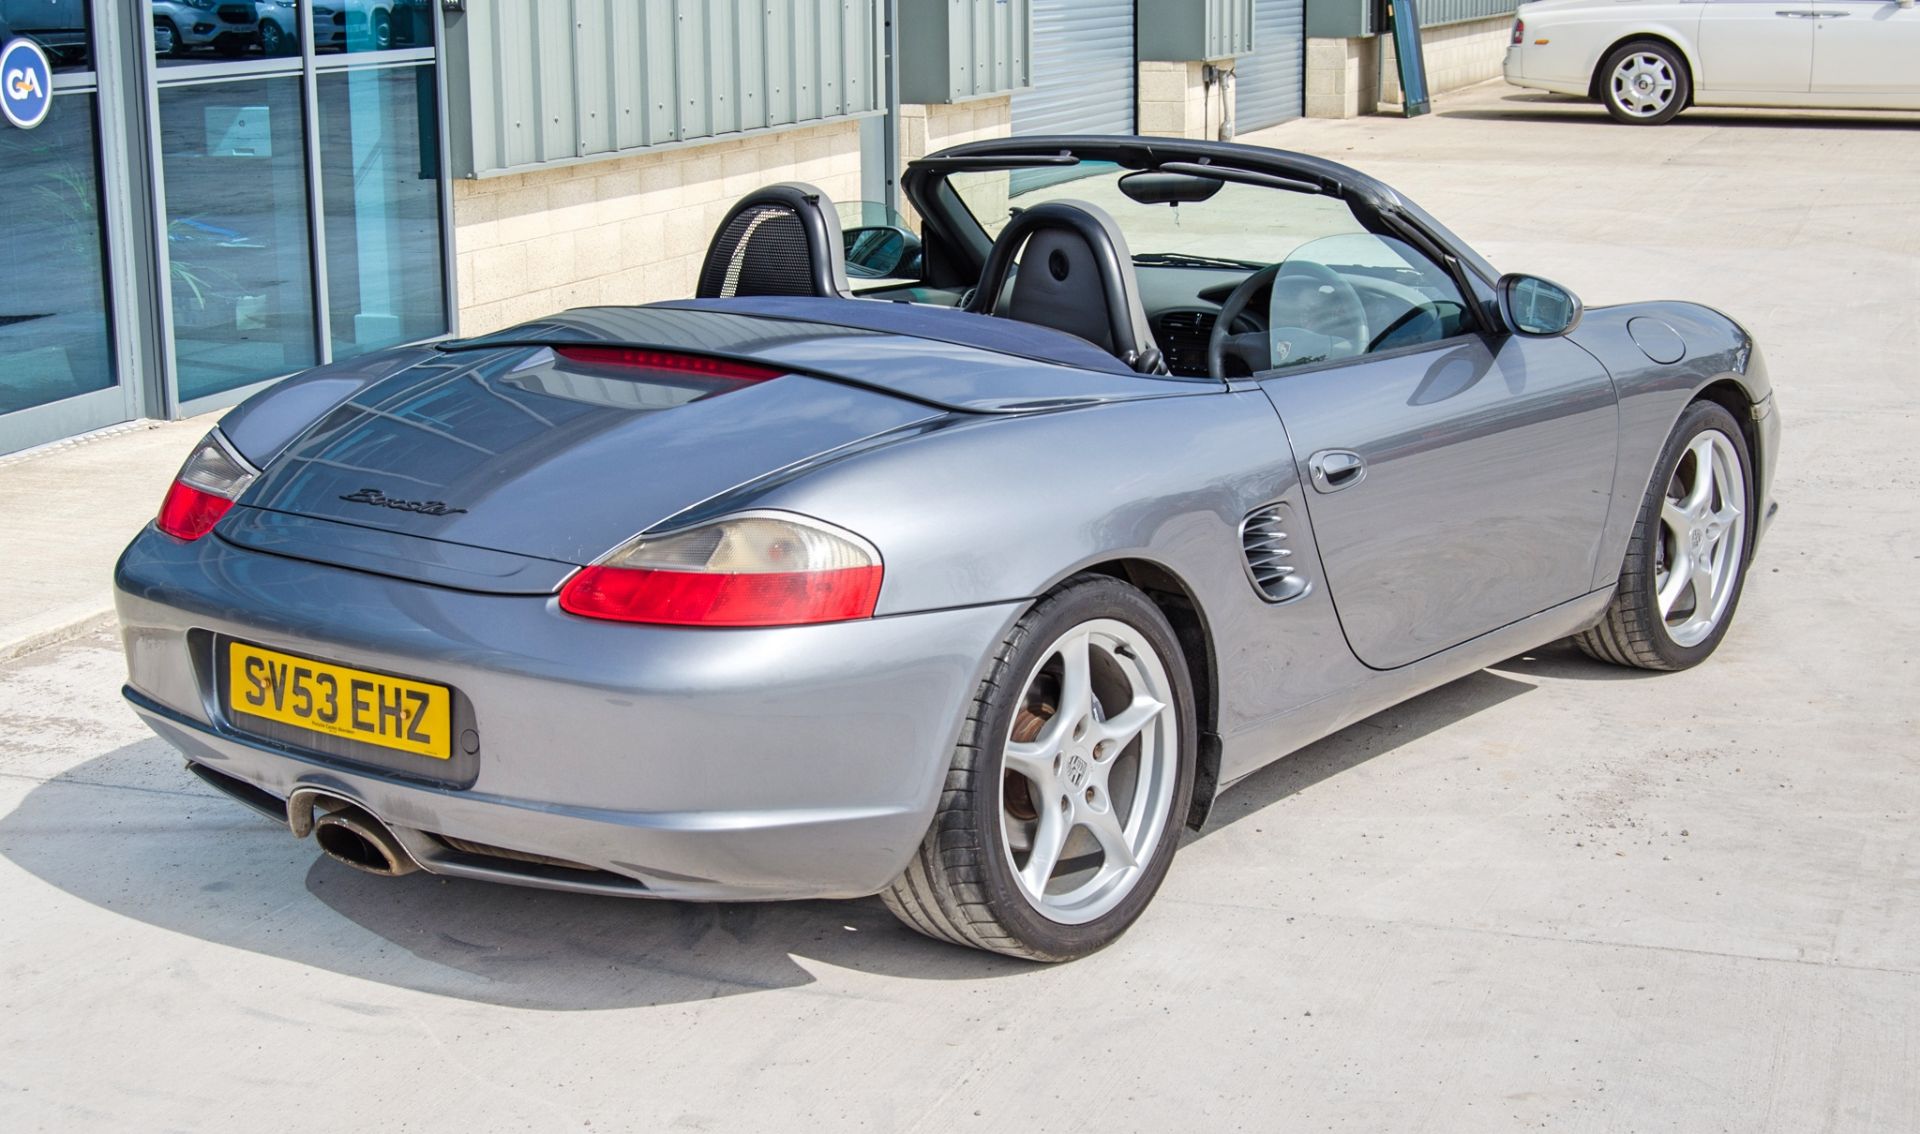 2003 Porsche Boxster 2.7 5 speed manual convertible roadster - Image 6 of 50